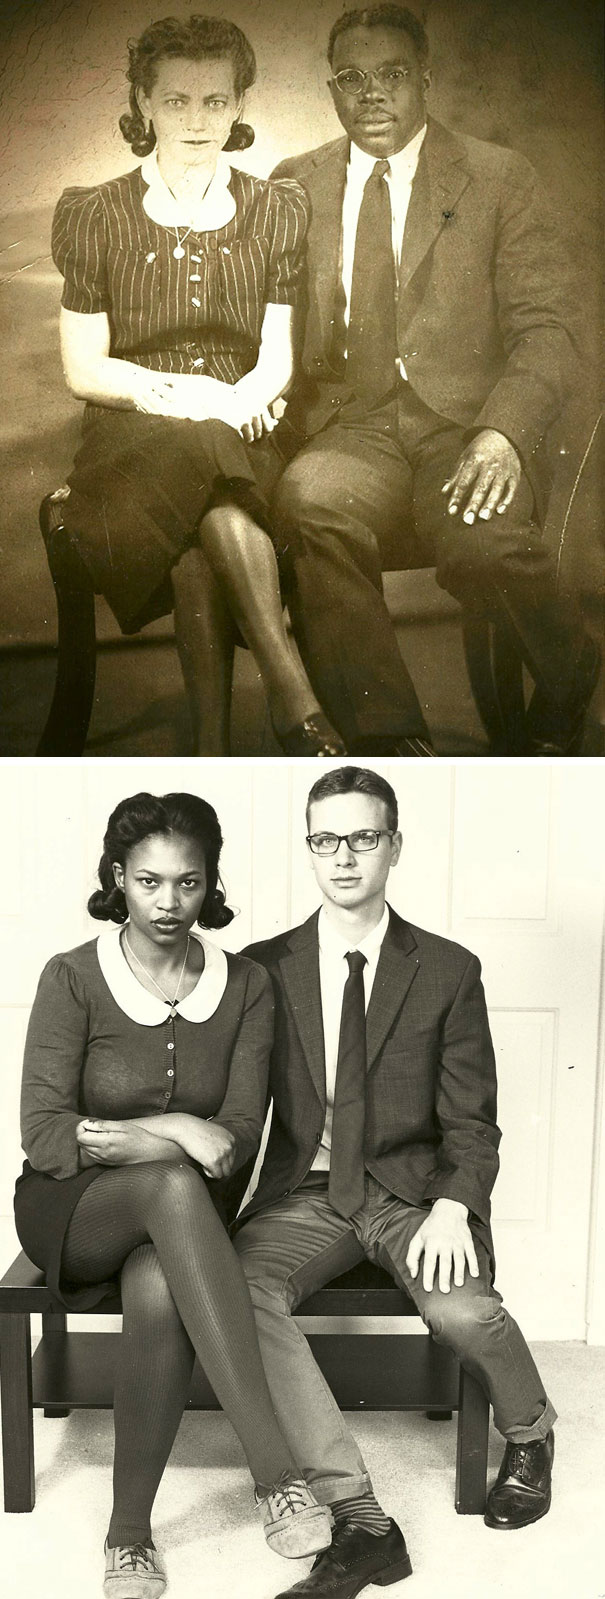 My Boyfriend And I Attempted To Recreate My Favorite Picture Of My Grandparents, This Was The Result